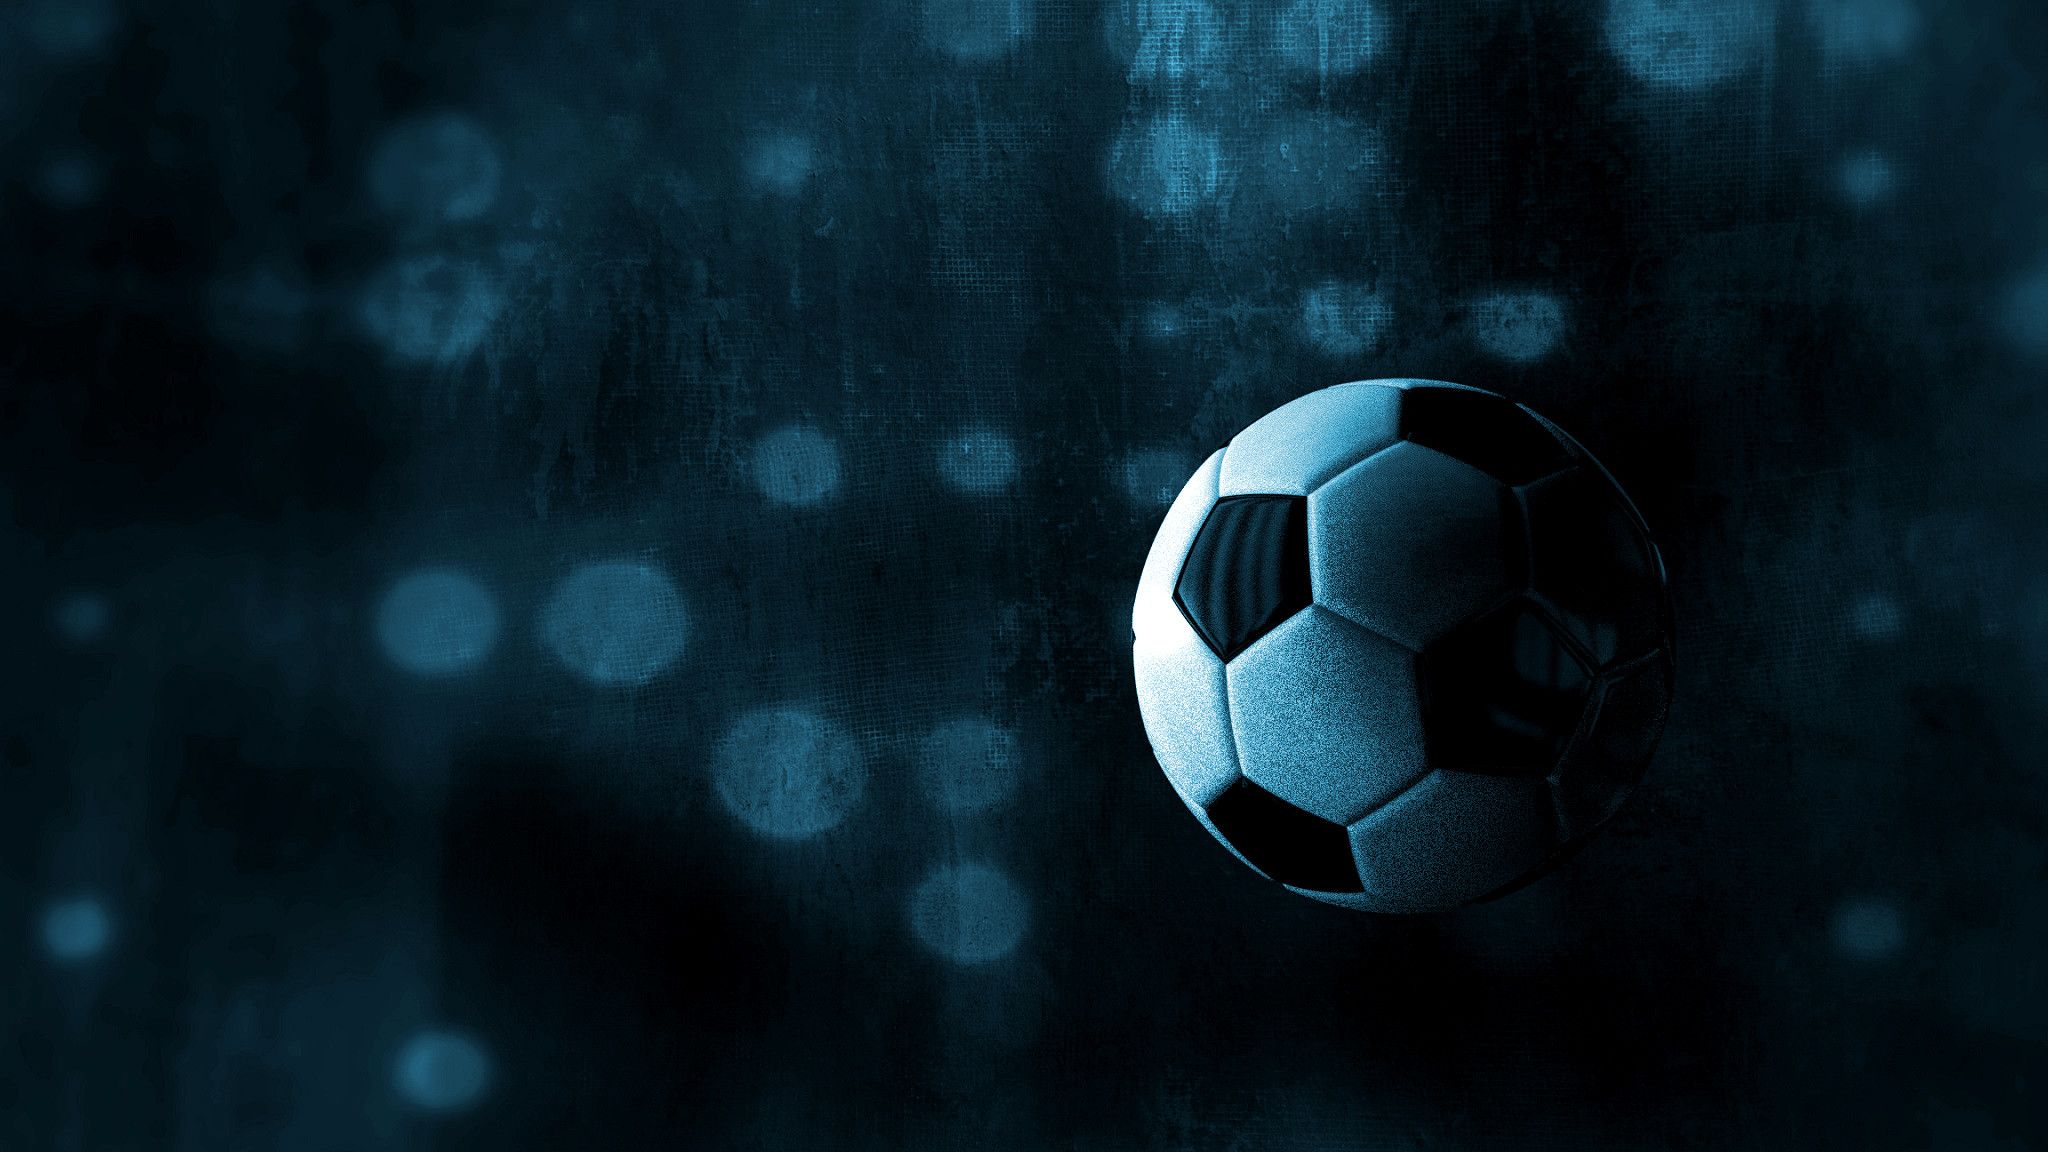 A soccer ball on a blue background - Soccer